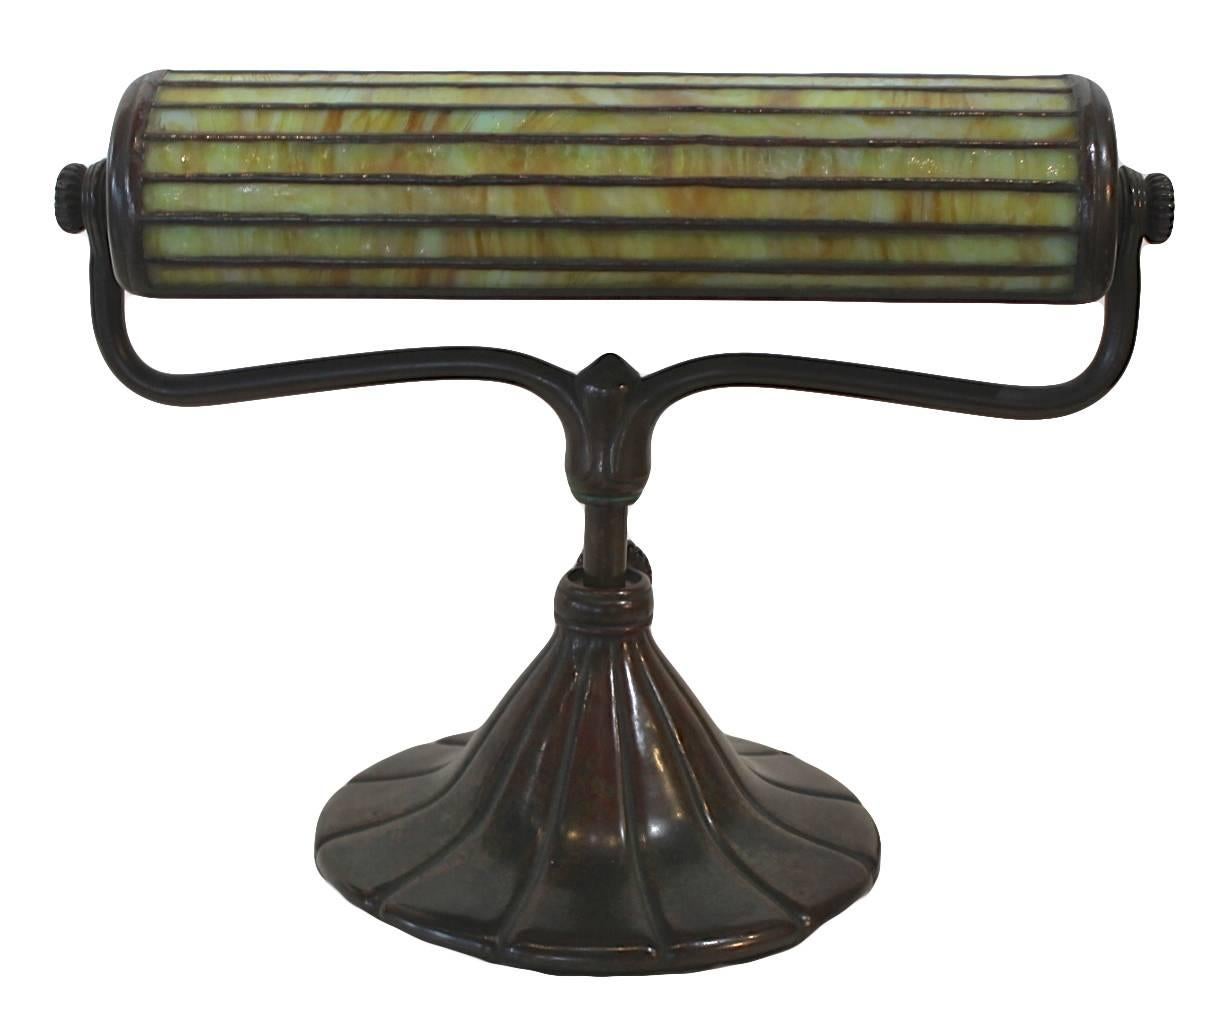 The cylindrical shade with horizontal panels of mottled pale green, white and gold glass symmetrically leaded, pivoting on a harp form bronze support and gadrooned circular base. Impressed Tiffany Studios New York
Provenance: The John L.Severance